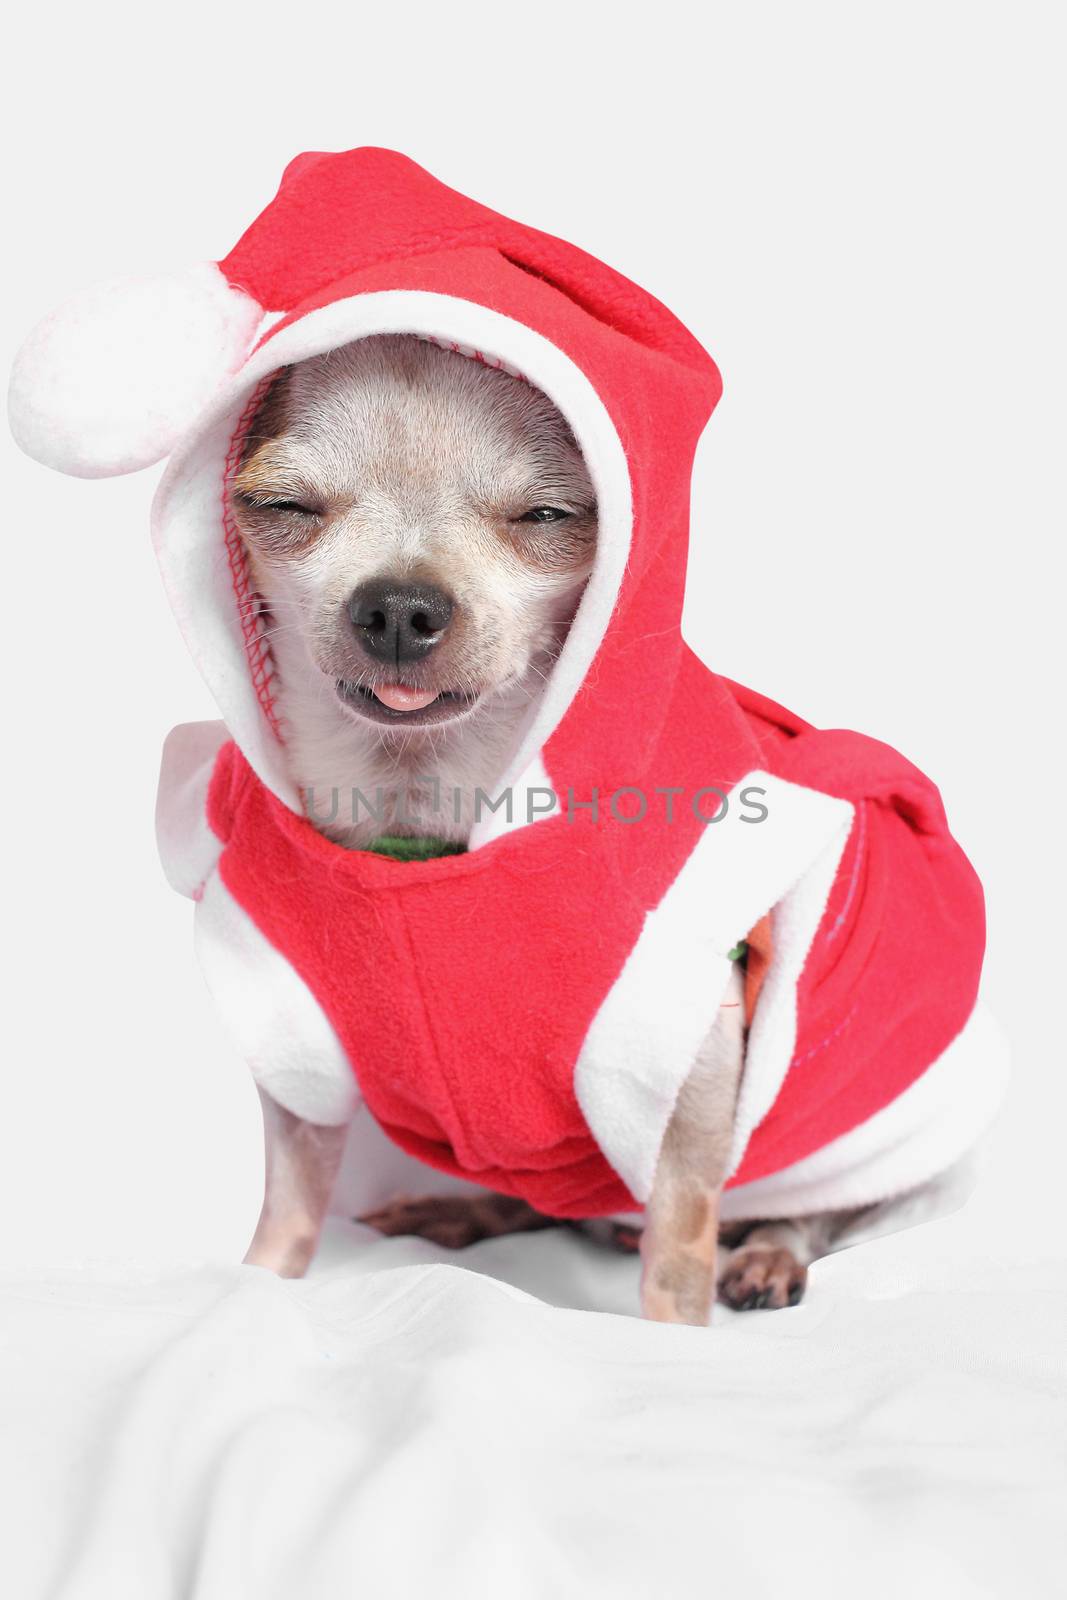 Chihuahua wearing a Christmas hat isolated on white background